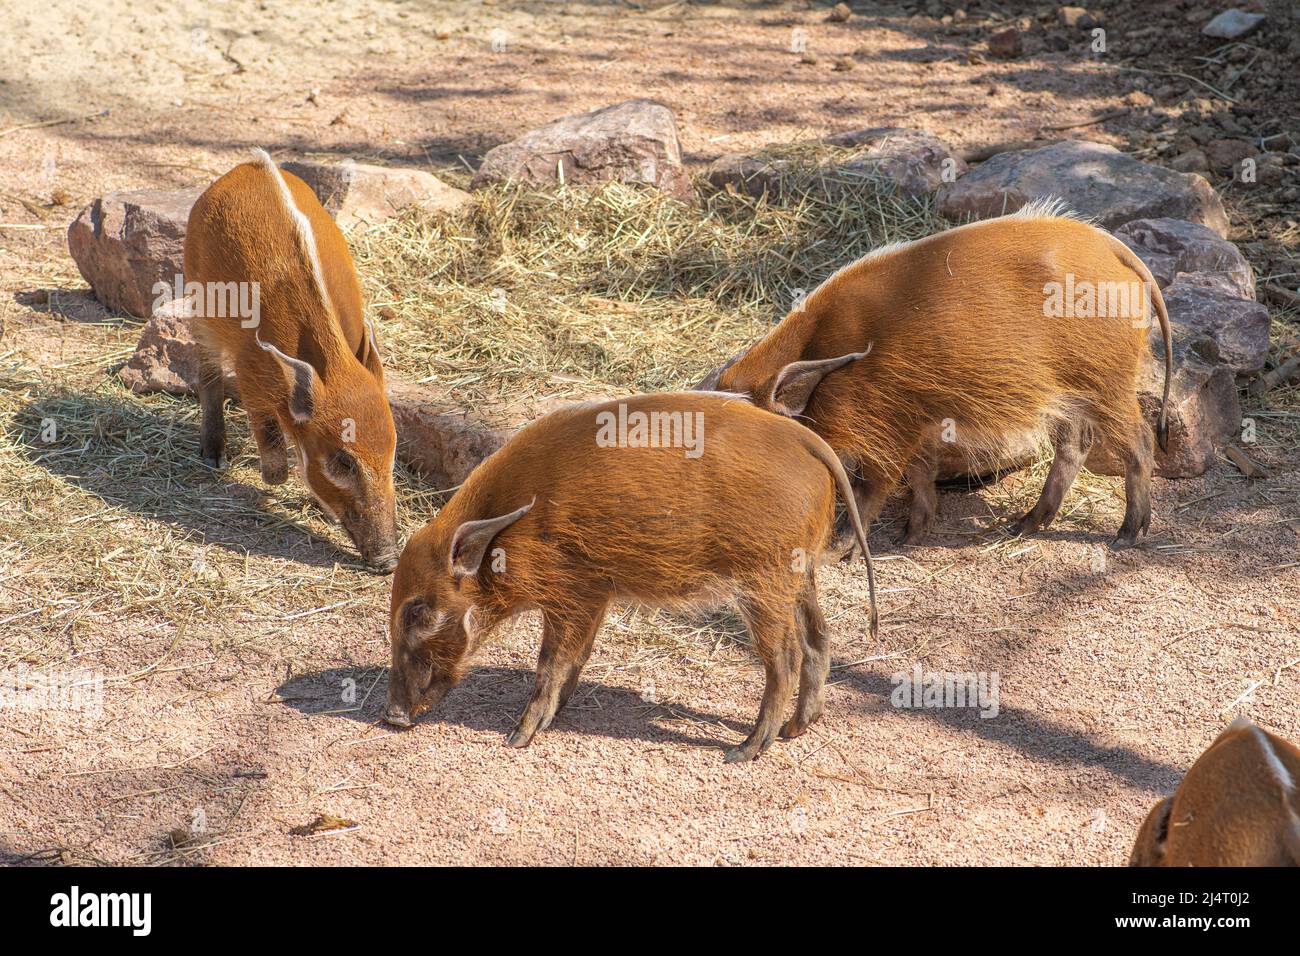 Bushpigs, potamochoerus larvatus, member of the pig family that inhabits forests, woodland, riverine vegetation and cultivated areas in East and South Stock Photo